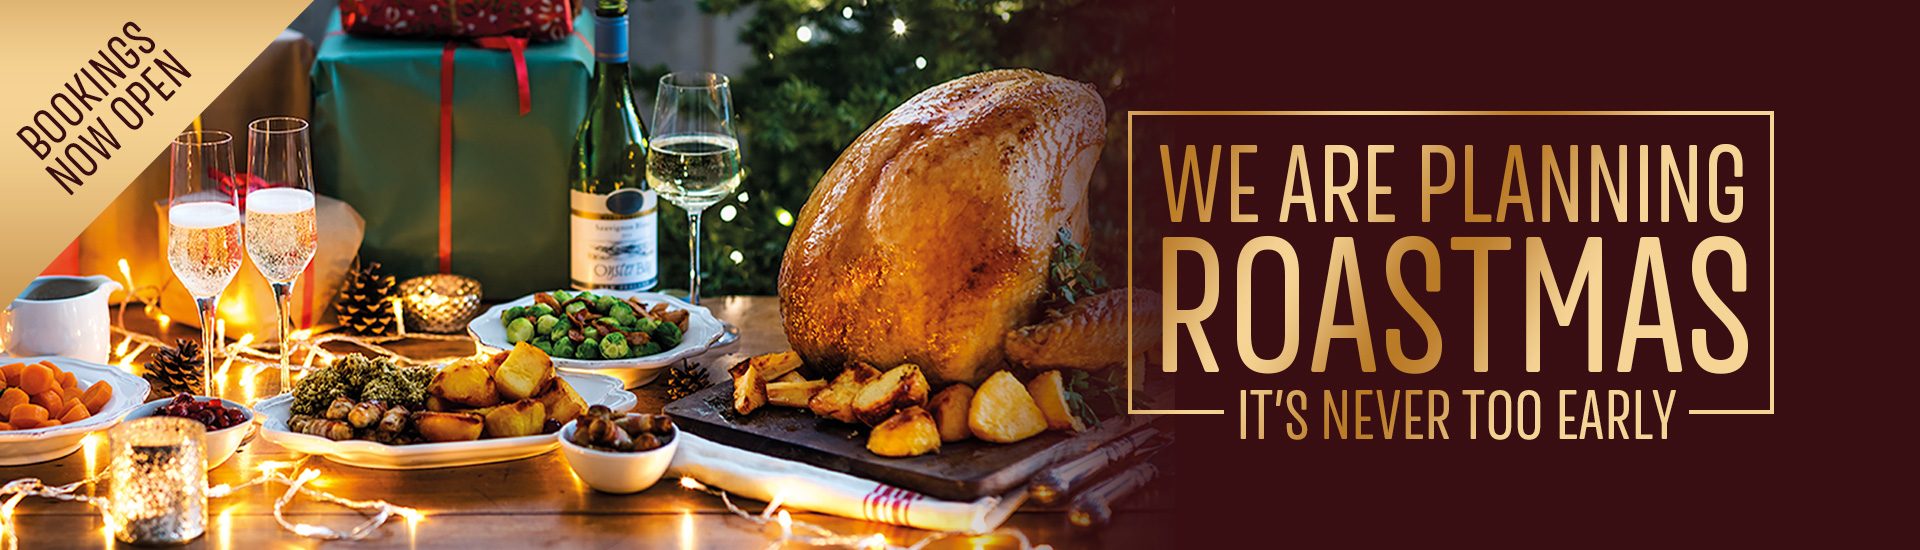 Christmas 2022 at your local Toby Carvery Aldenham | Home of the Roast